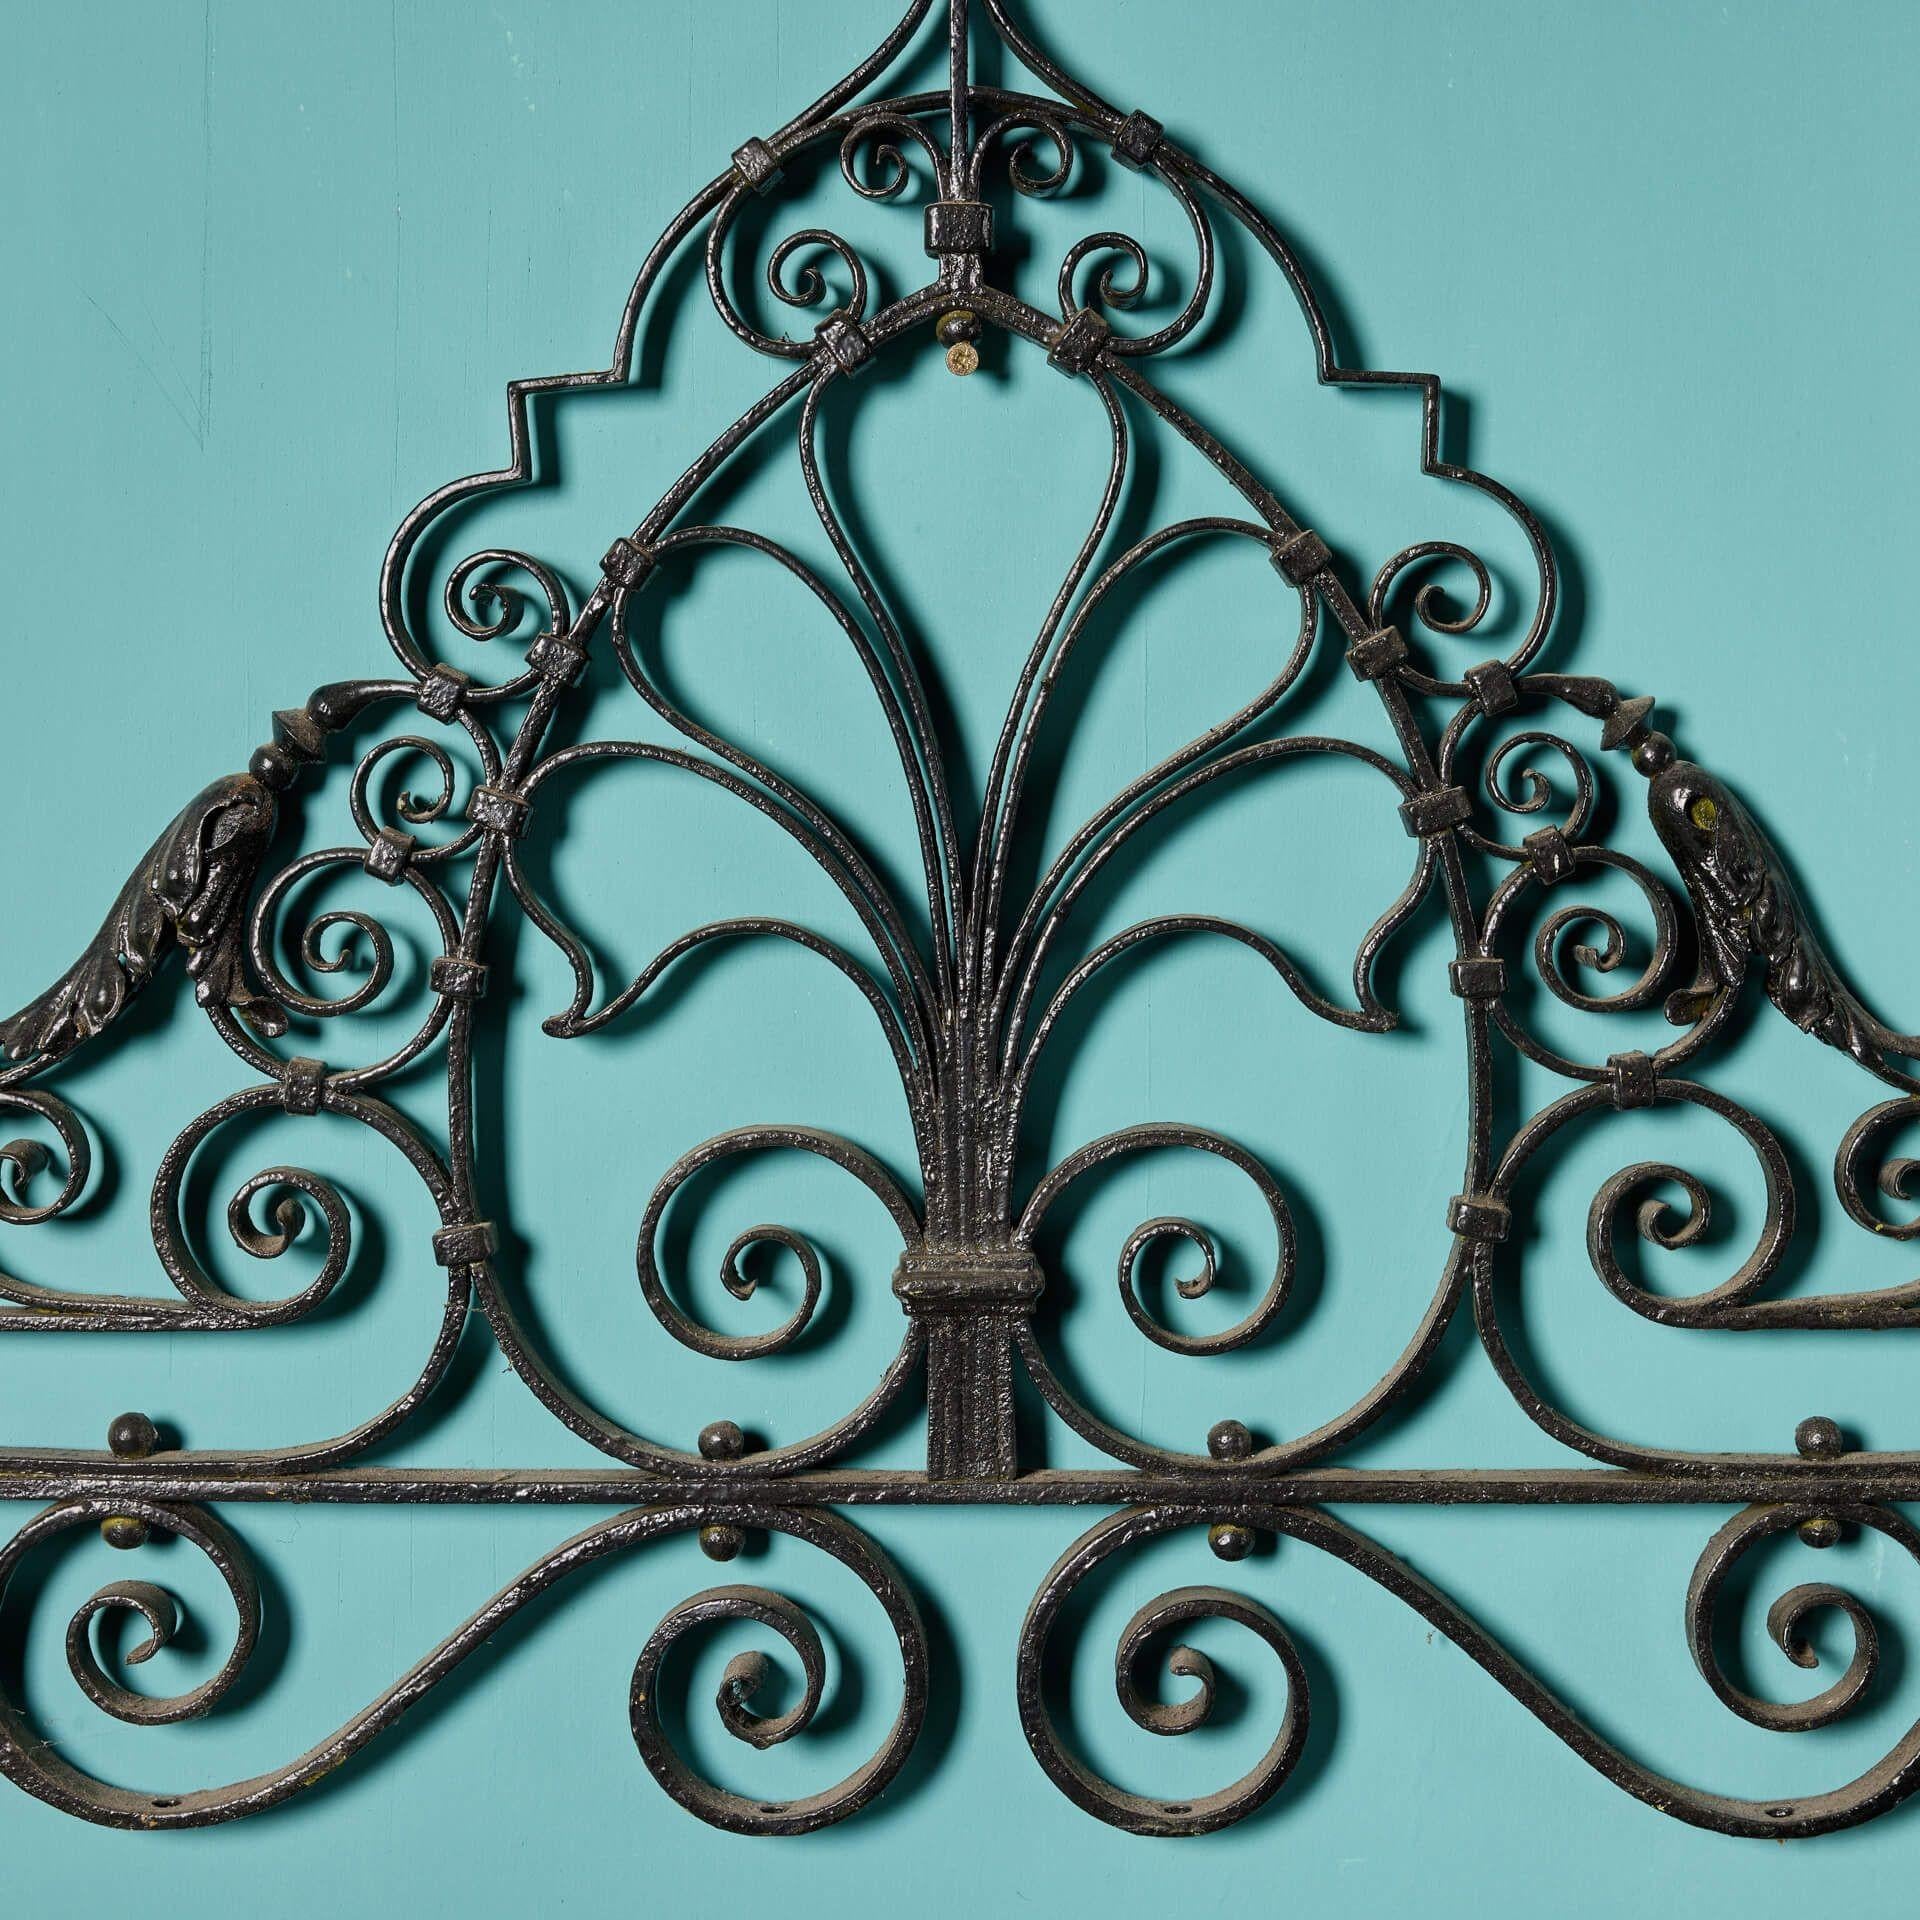 Regency Reclaimed Wrought Iron Gate Overthrow For Sale